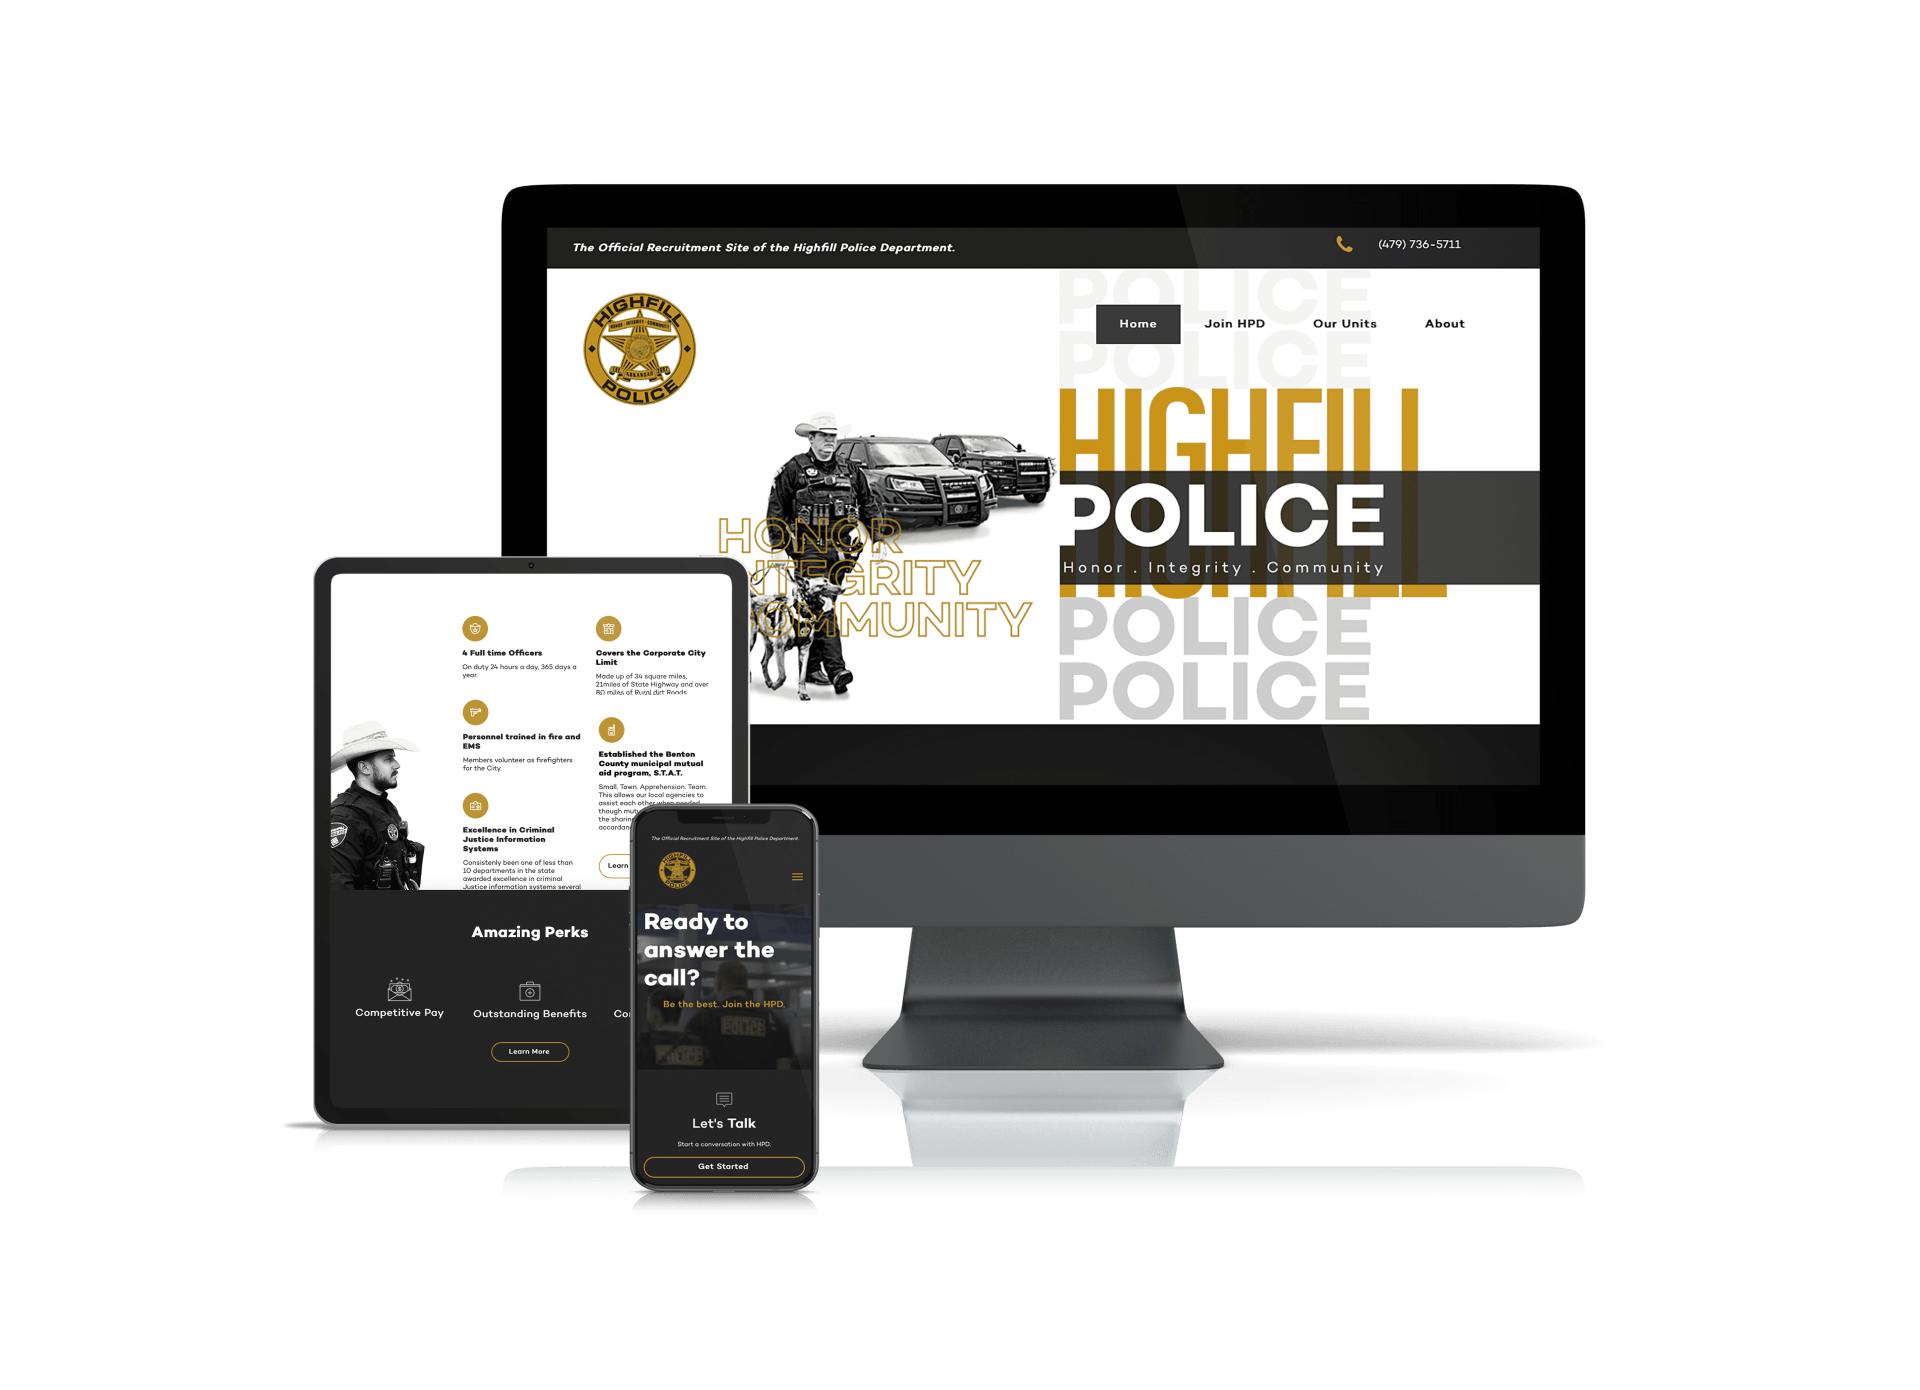 The Highfill Police Department